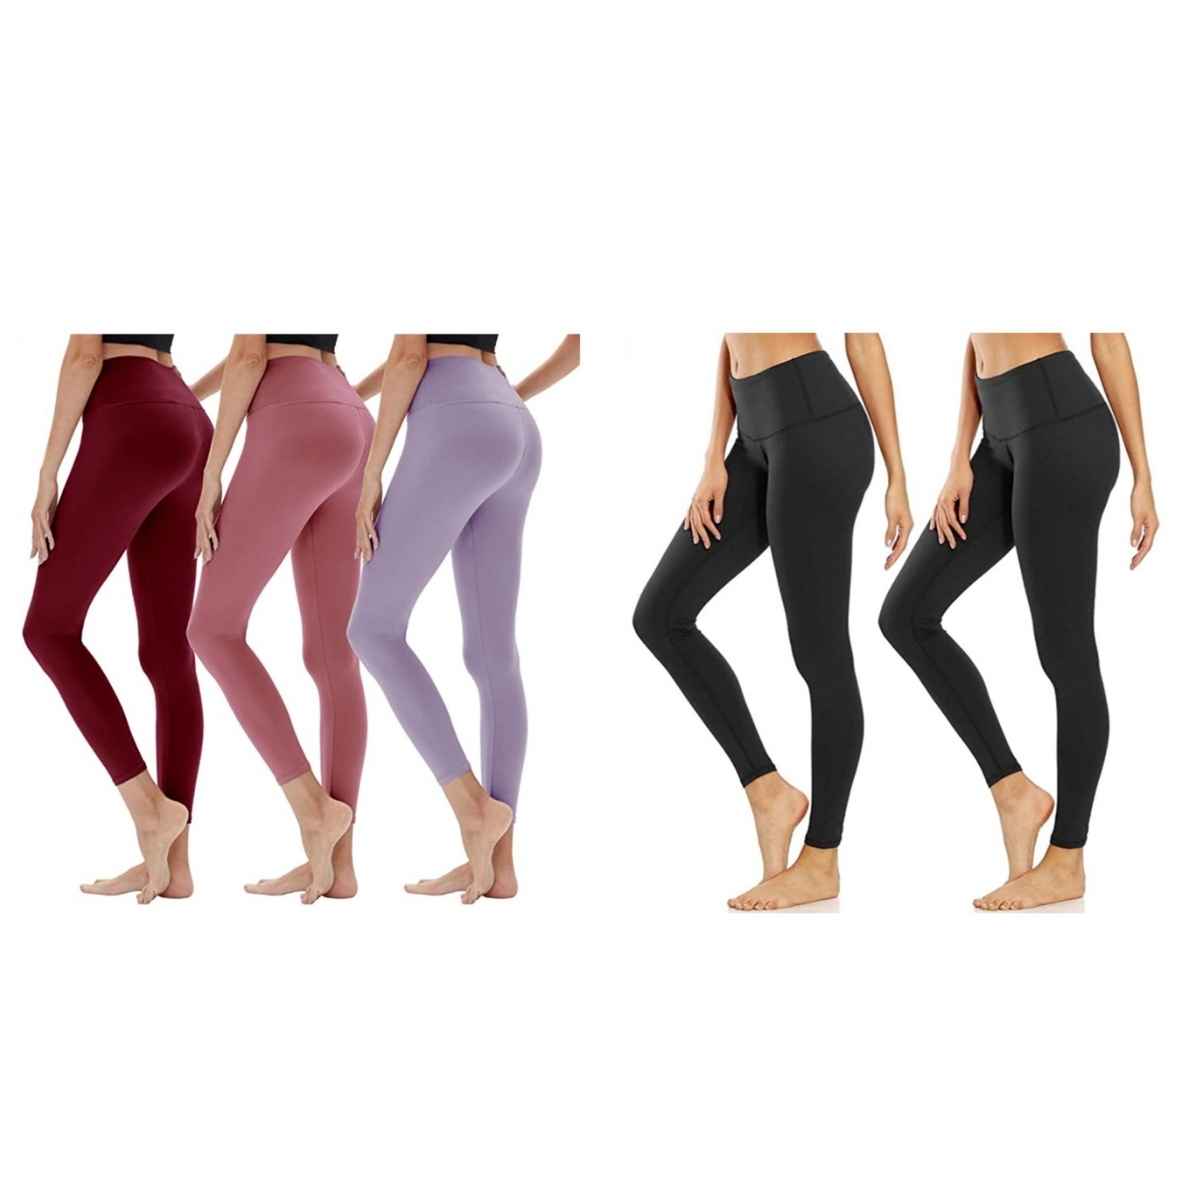 Save 50% on Yolix workout leggings, 2-pack for $9.99 | Smart Savers